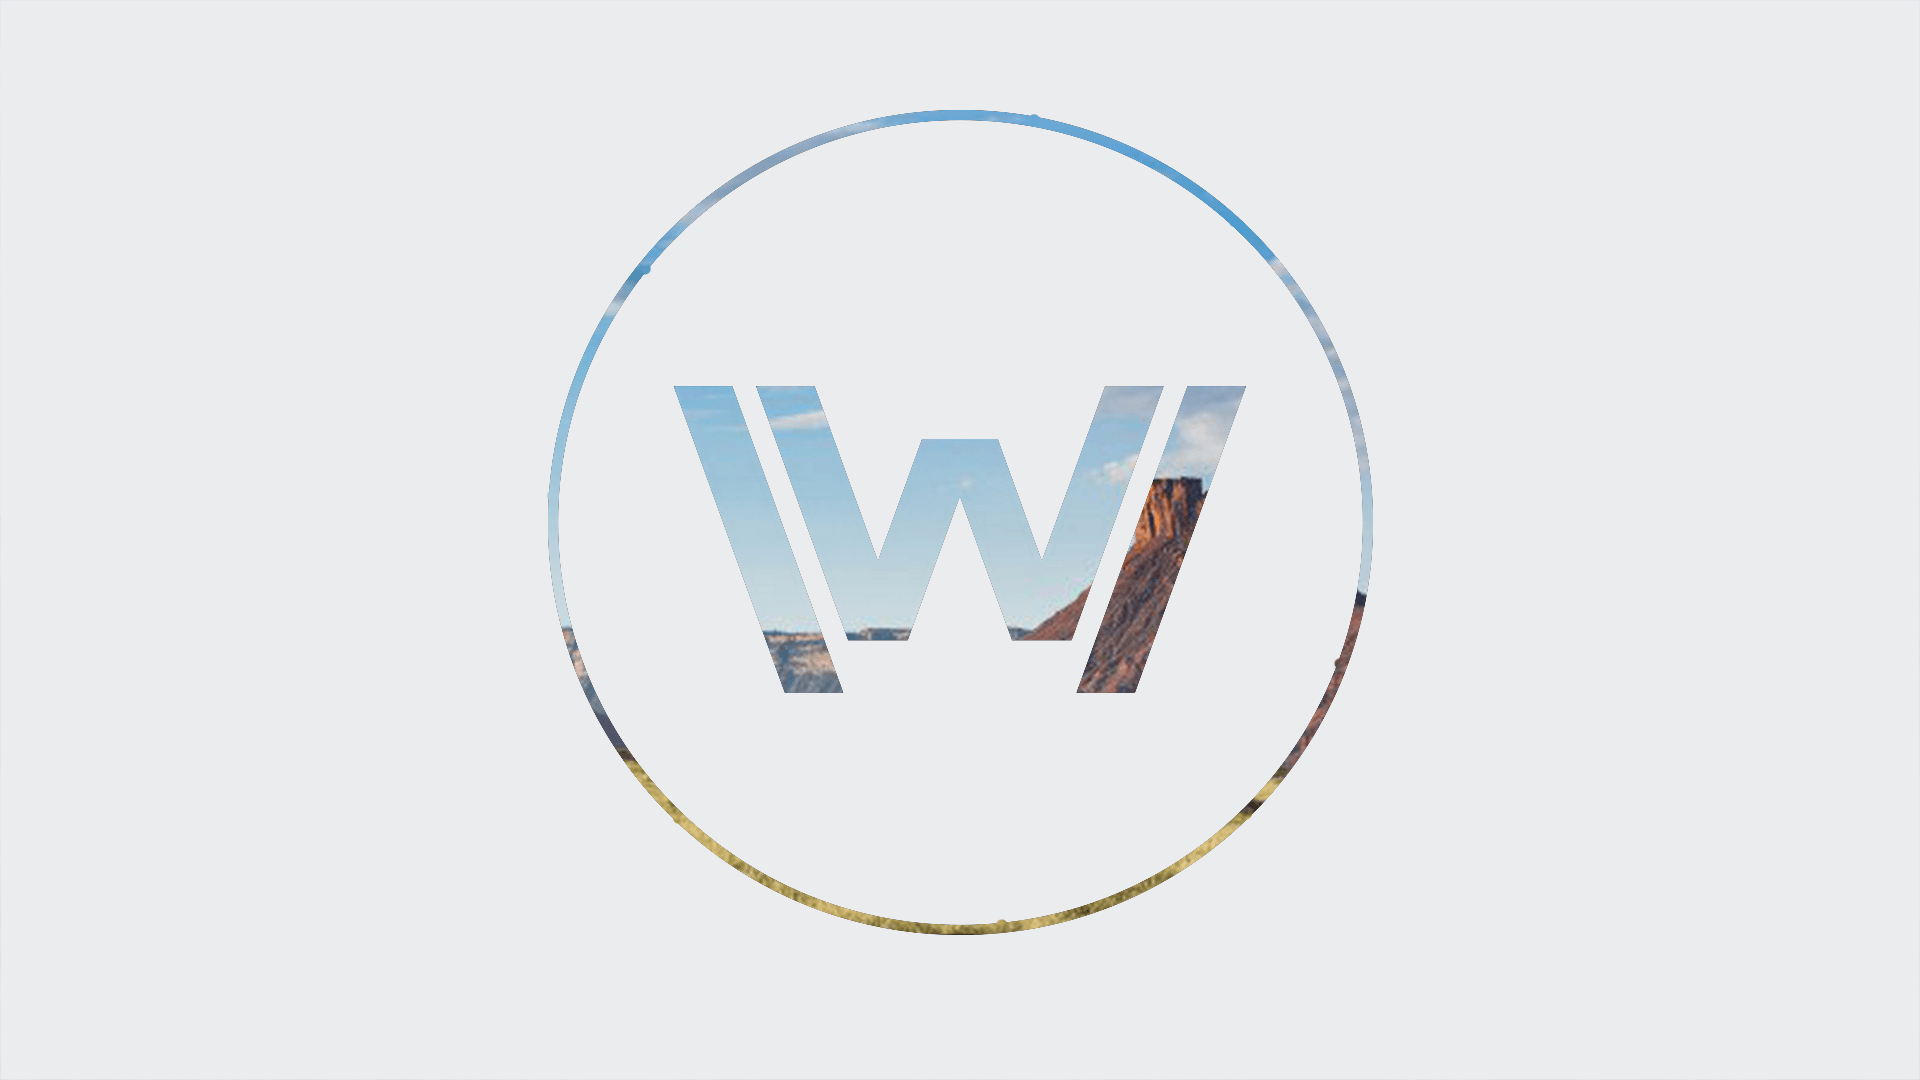 I thought I would share some Westworld wallpapers I made!